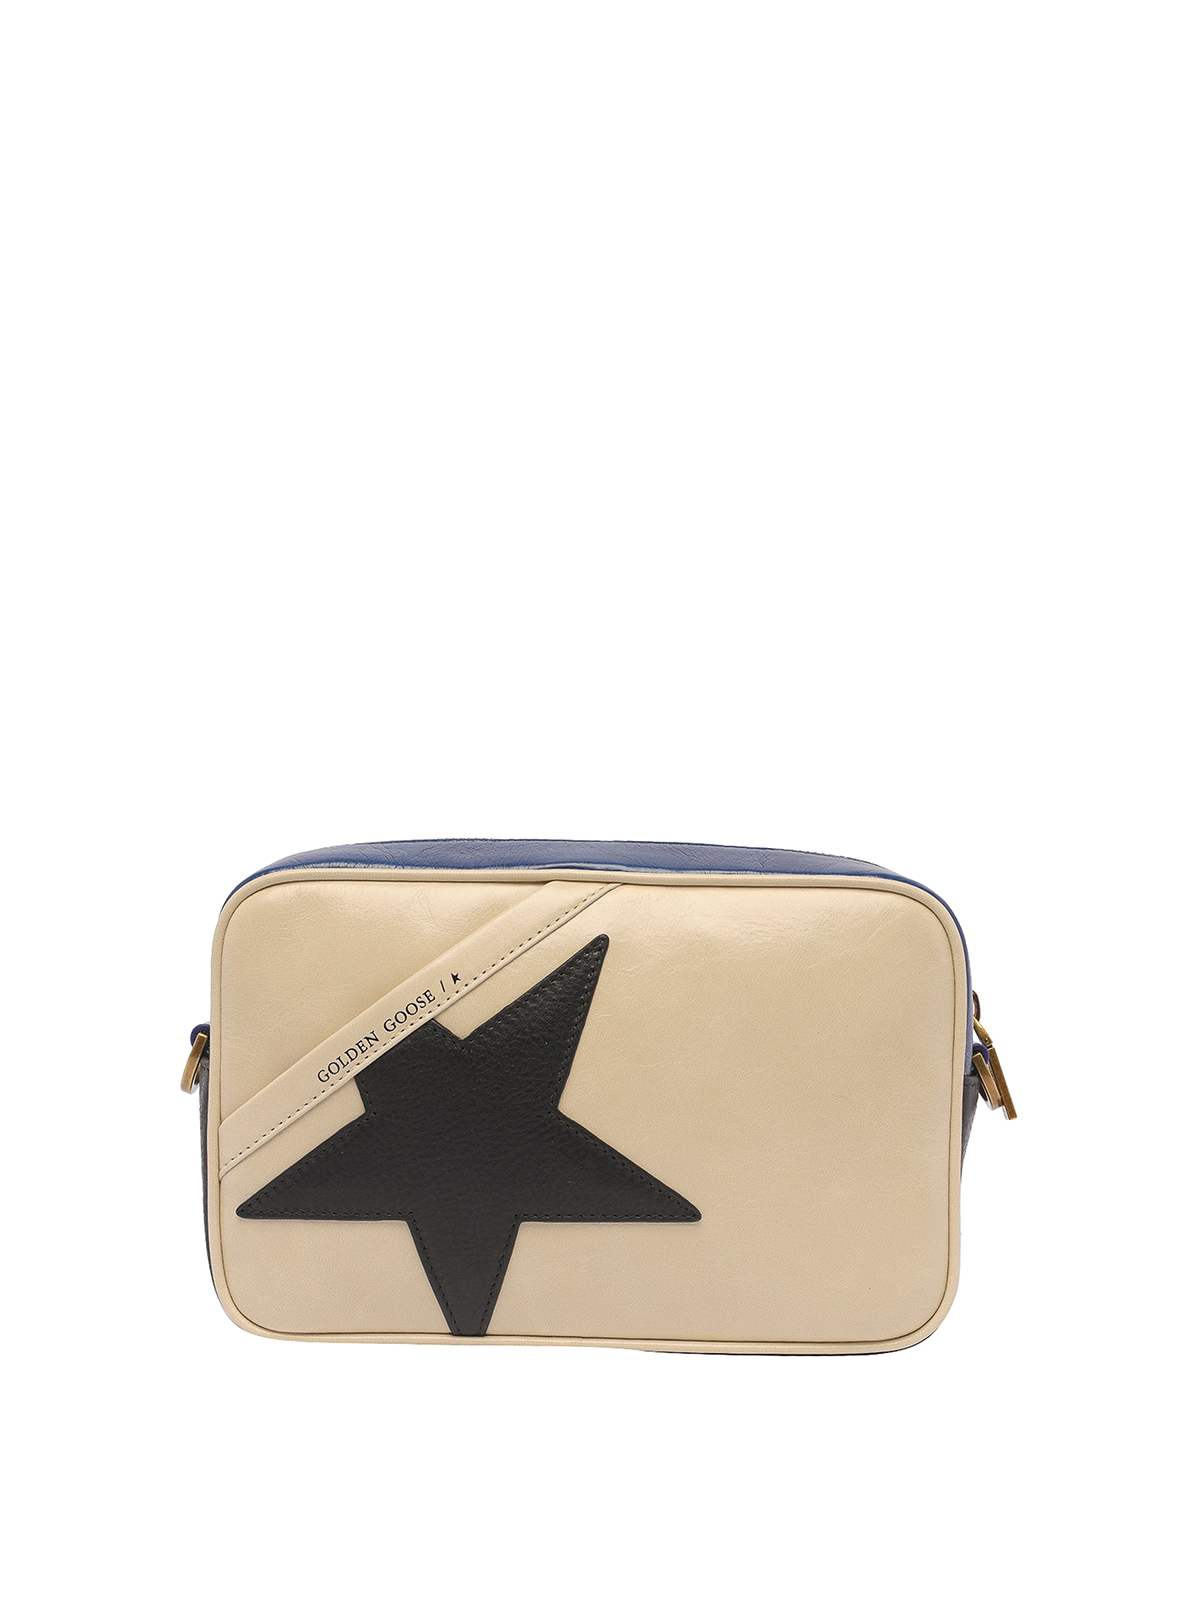 GOLDEN GOOSE STAR LEATHER BAG WITH STRAP